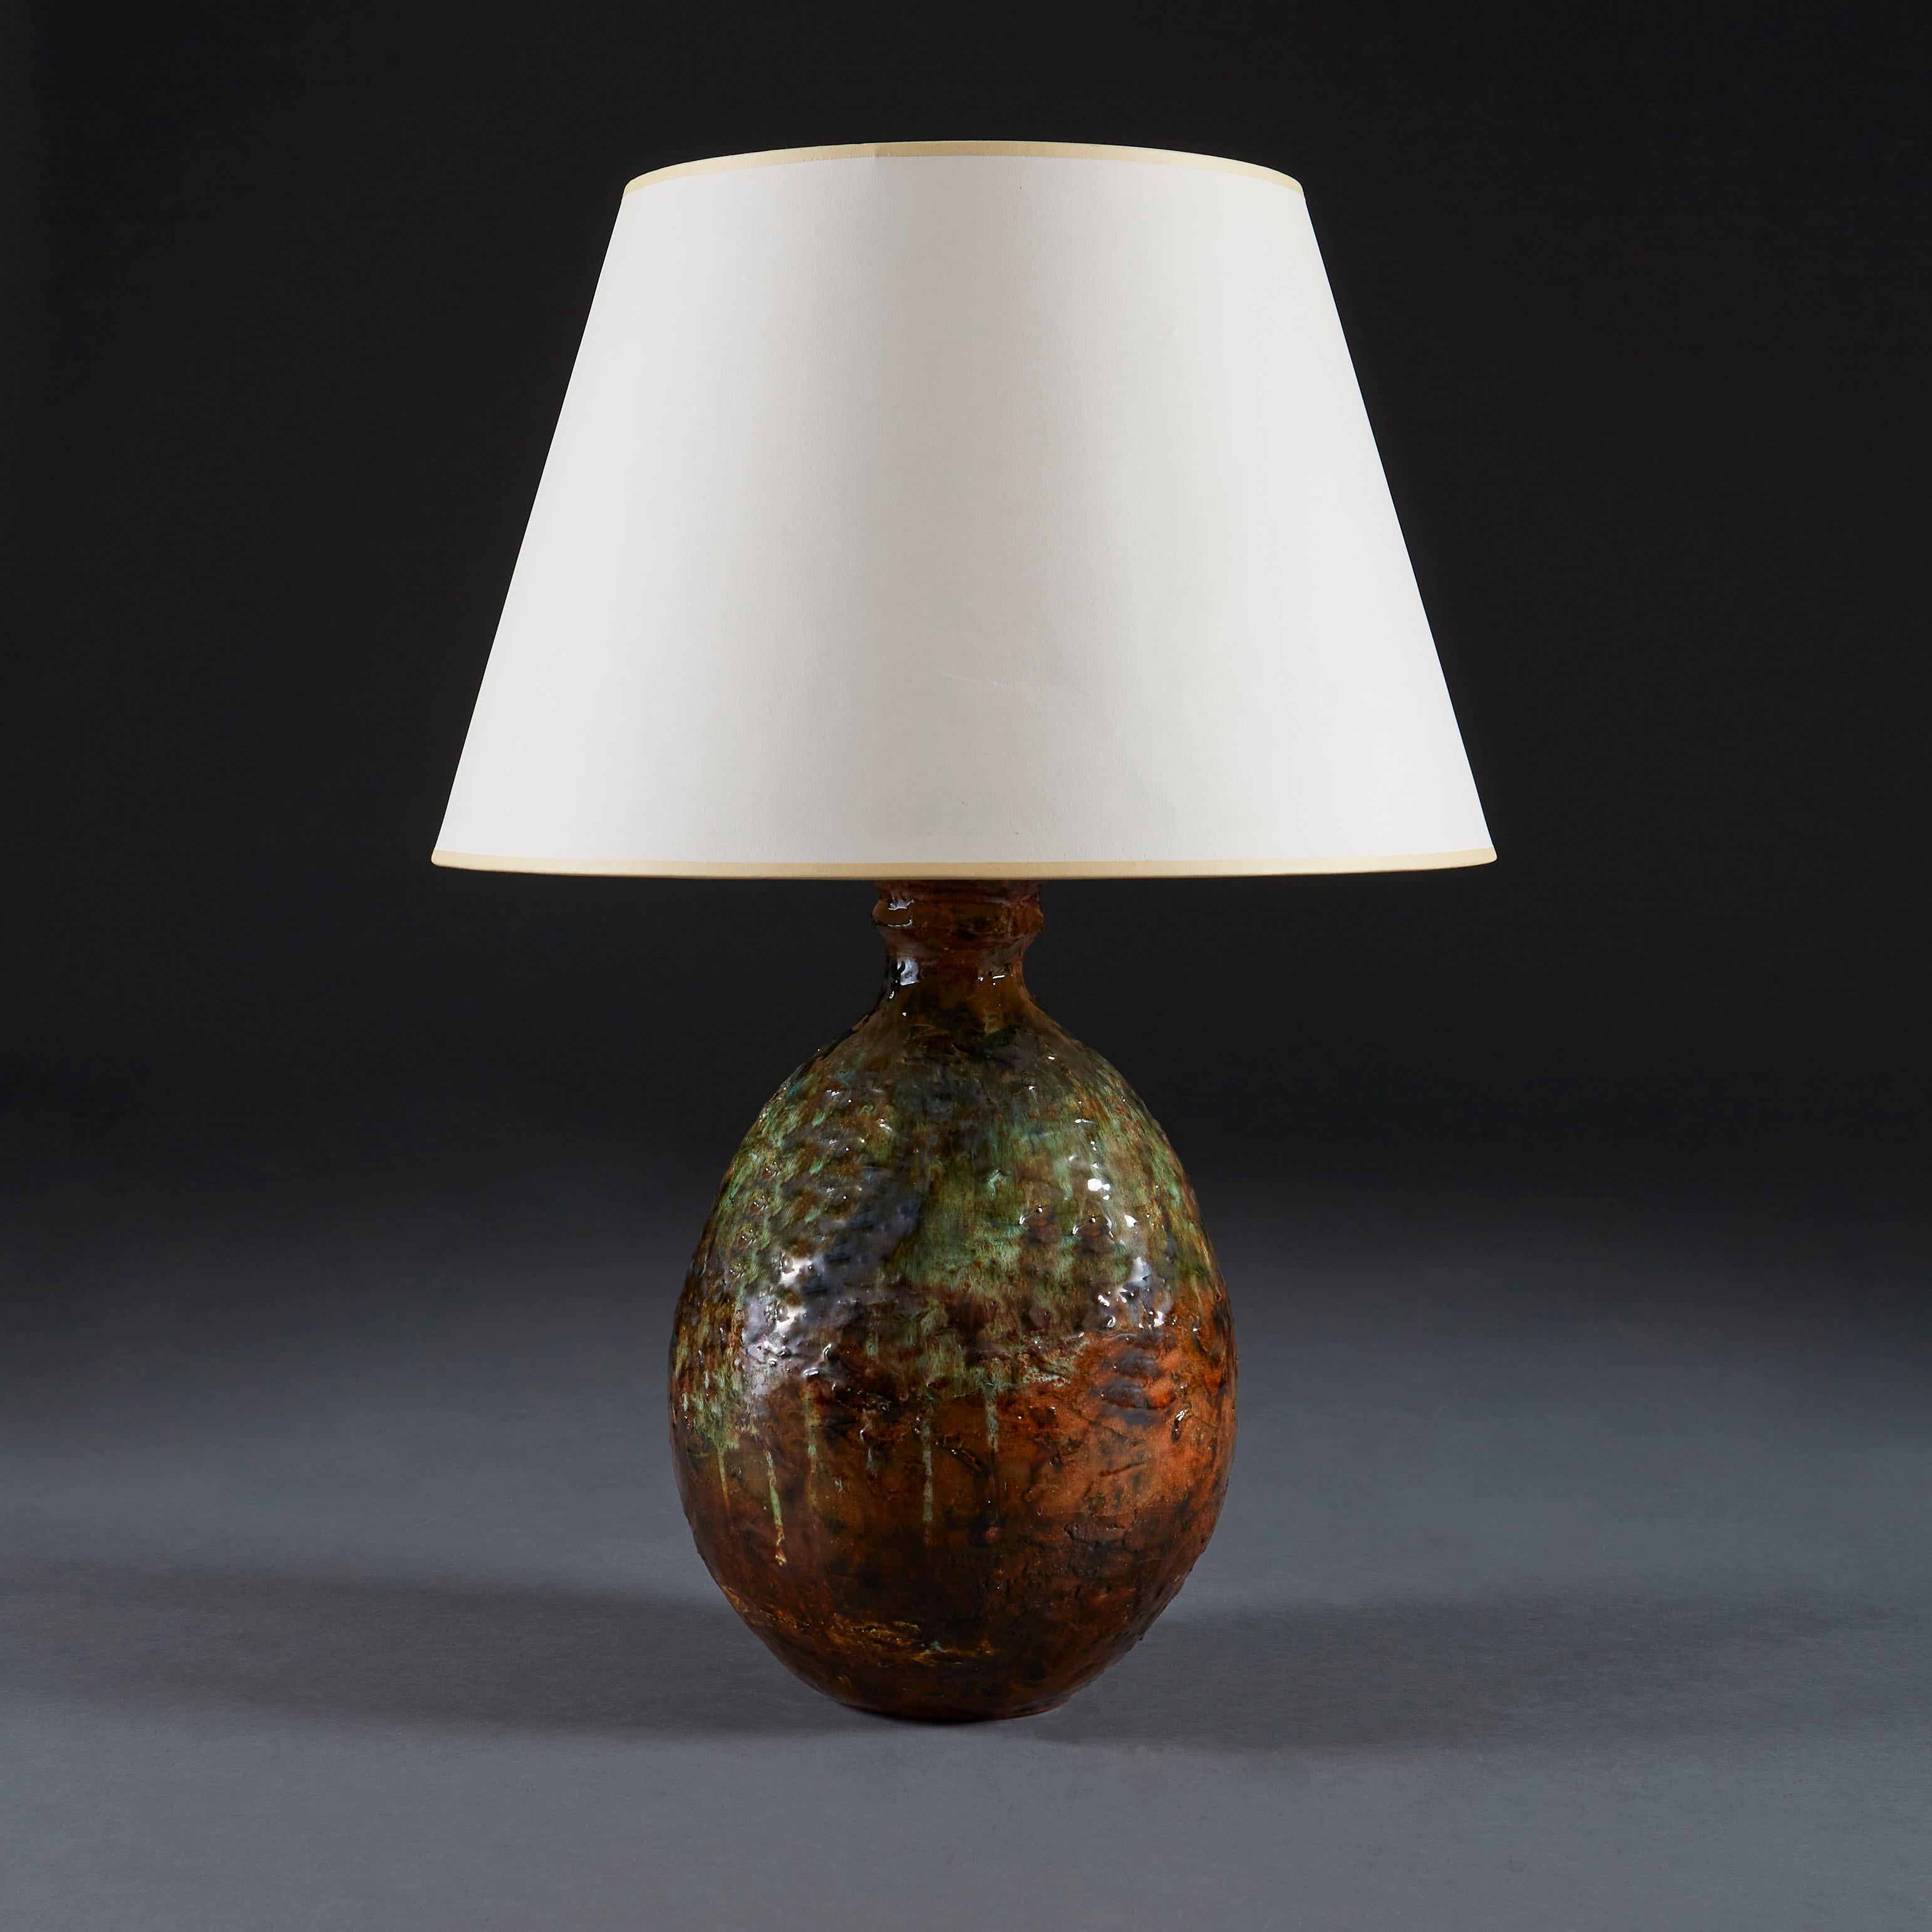 Glazed Mid-20th Century Art Pottery Vase as a Table Lamp with Green and Brown Glaze